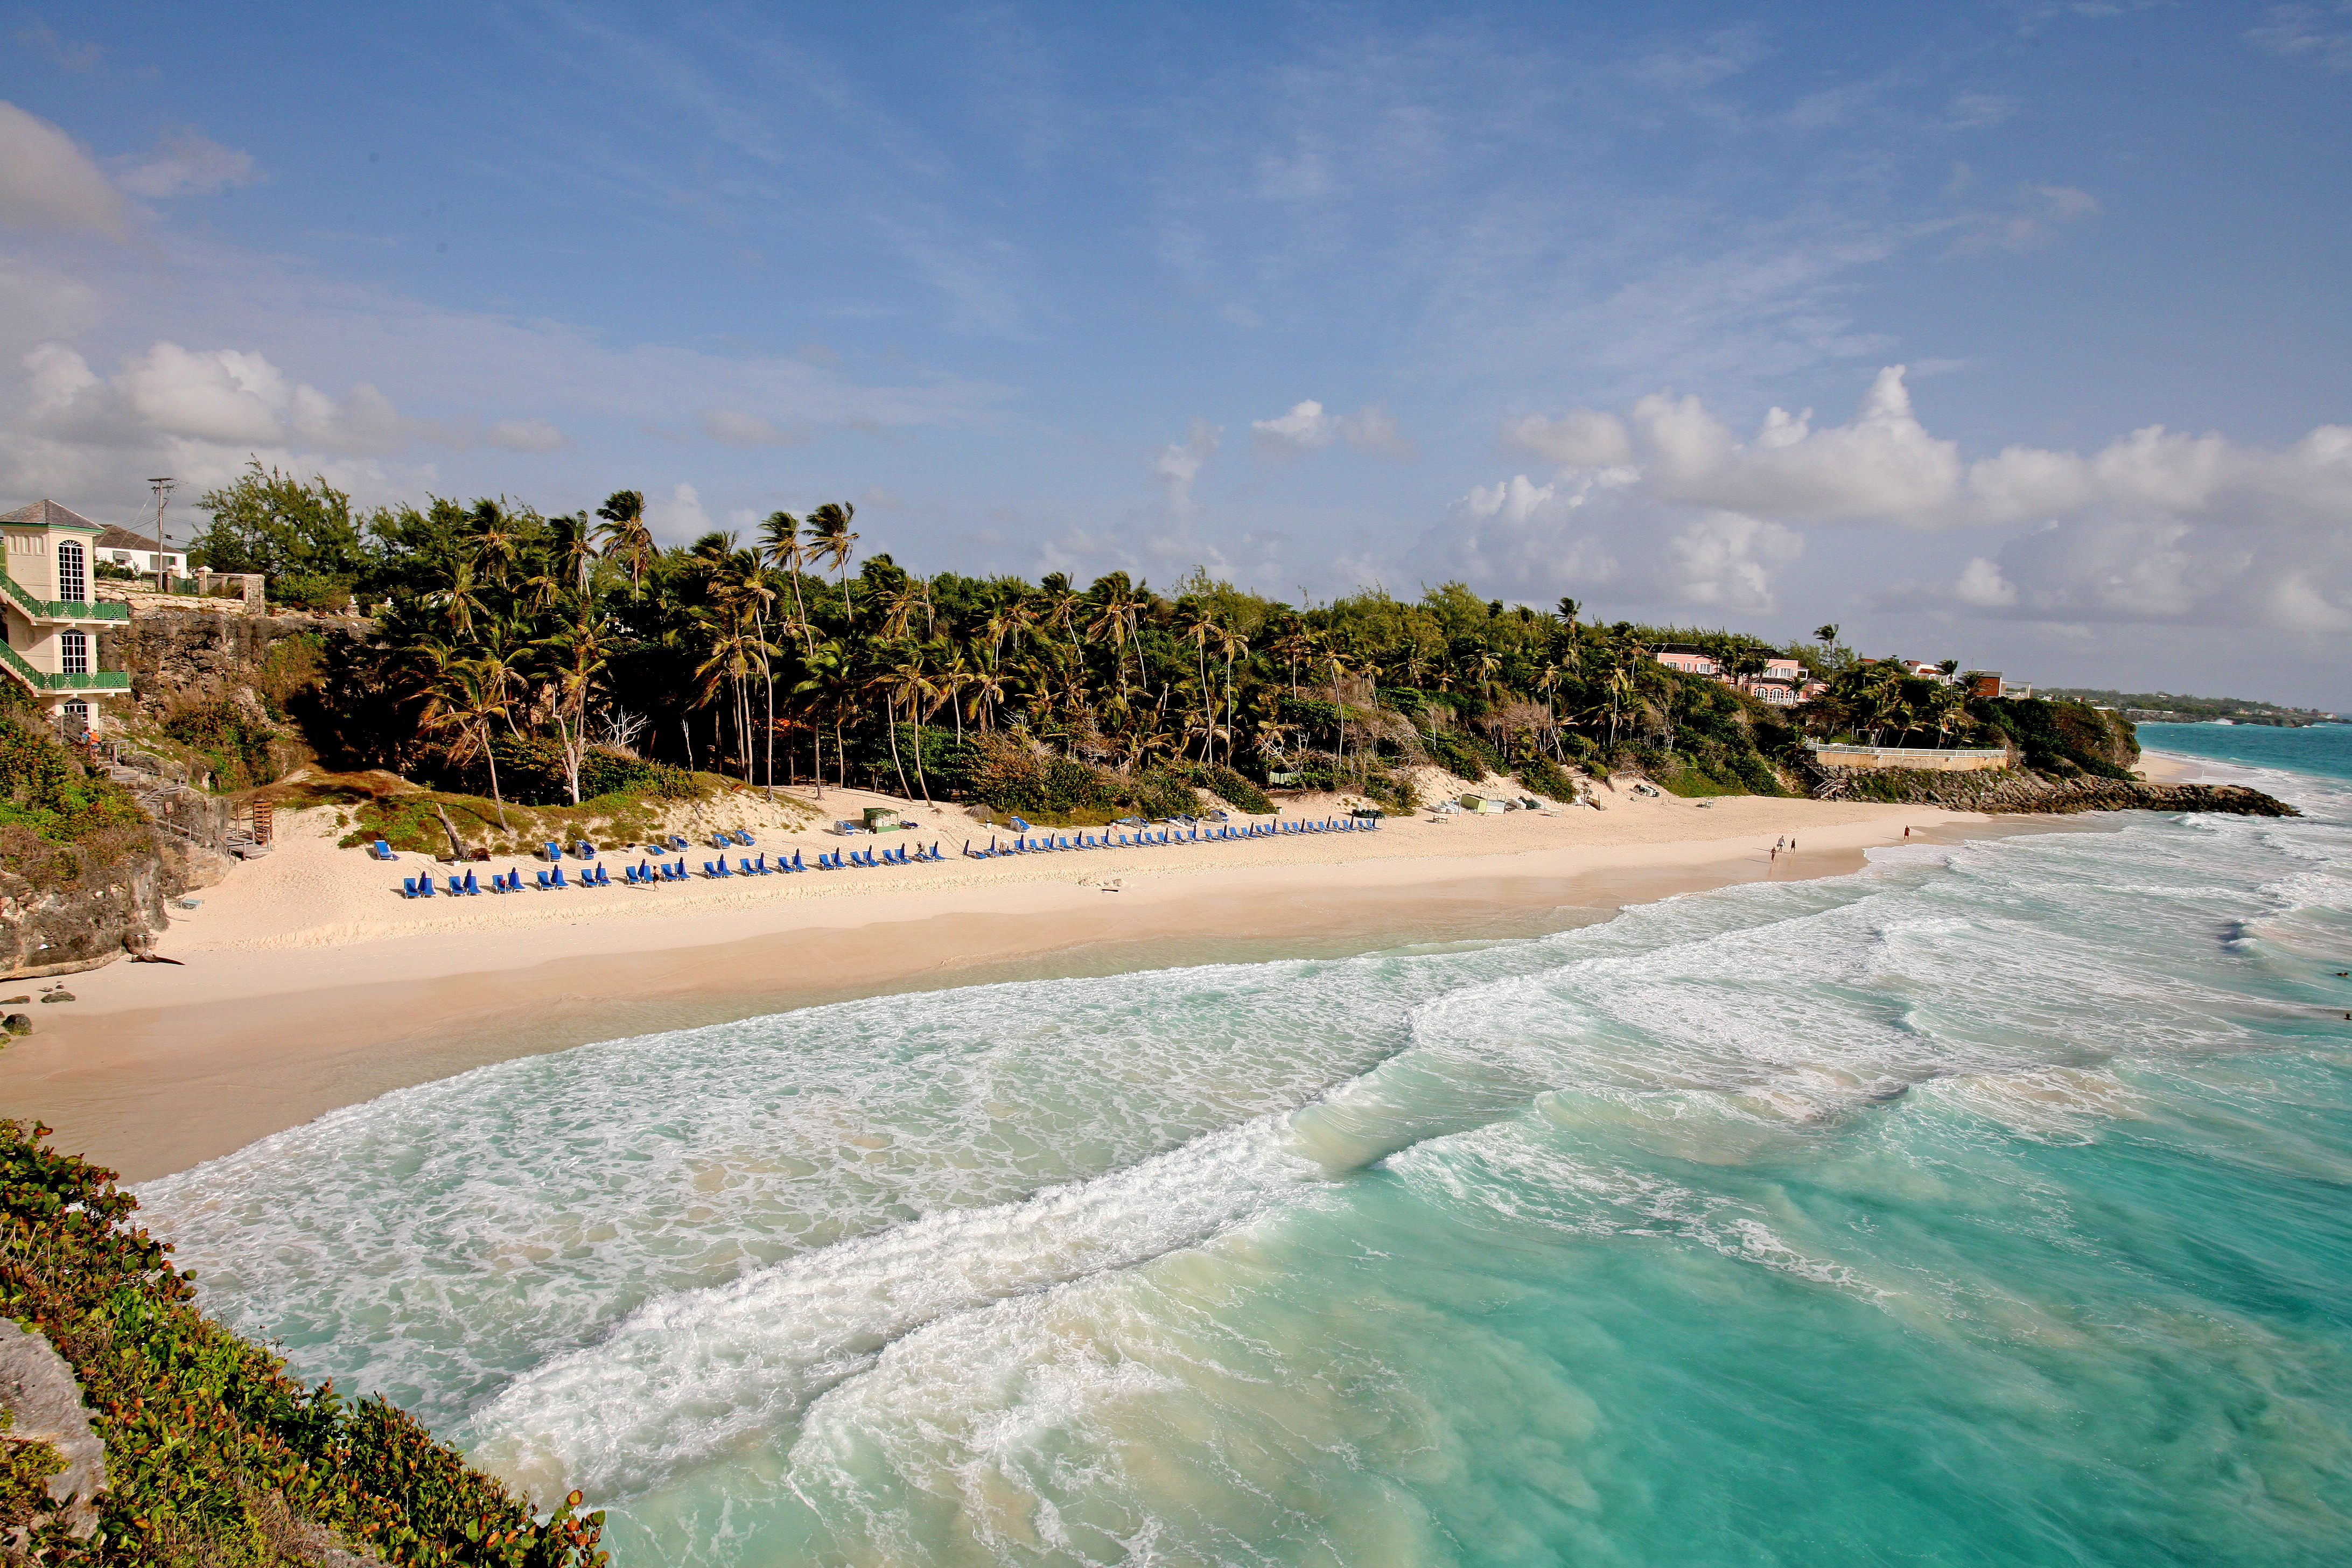 The beach in Barbados.